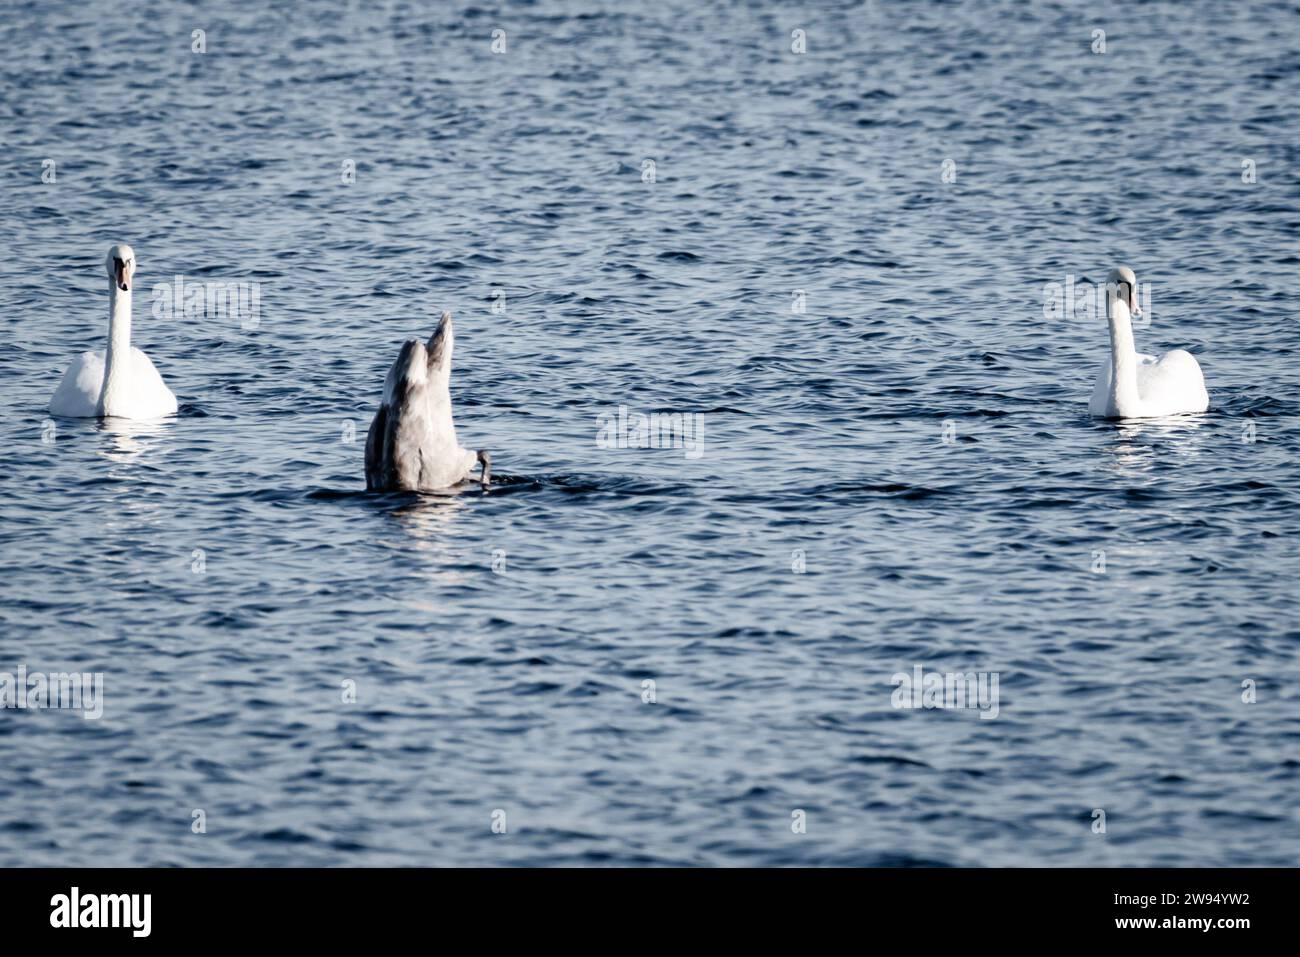 A swan family glides on the water, with snowy parents watching as a dark-feathered cygnet semi-submerges in search of food. Stock Photo